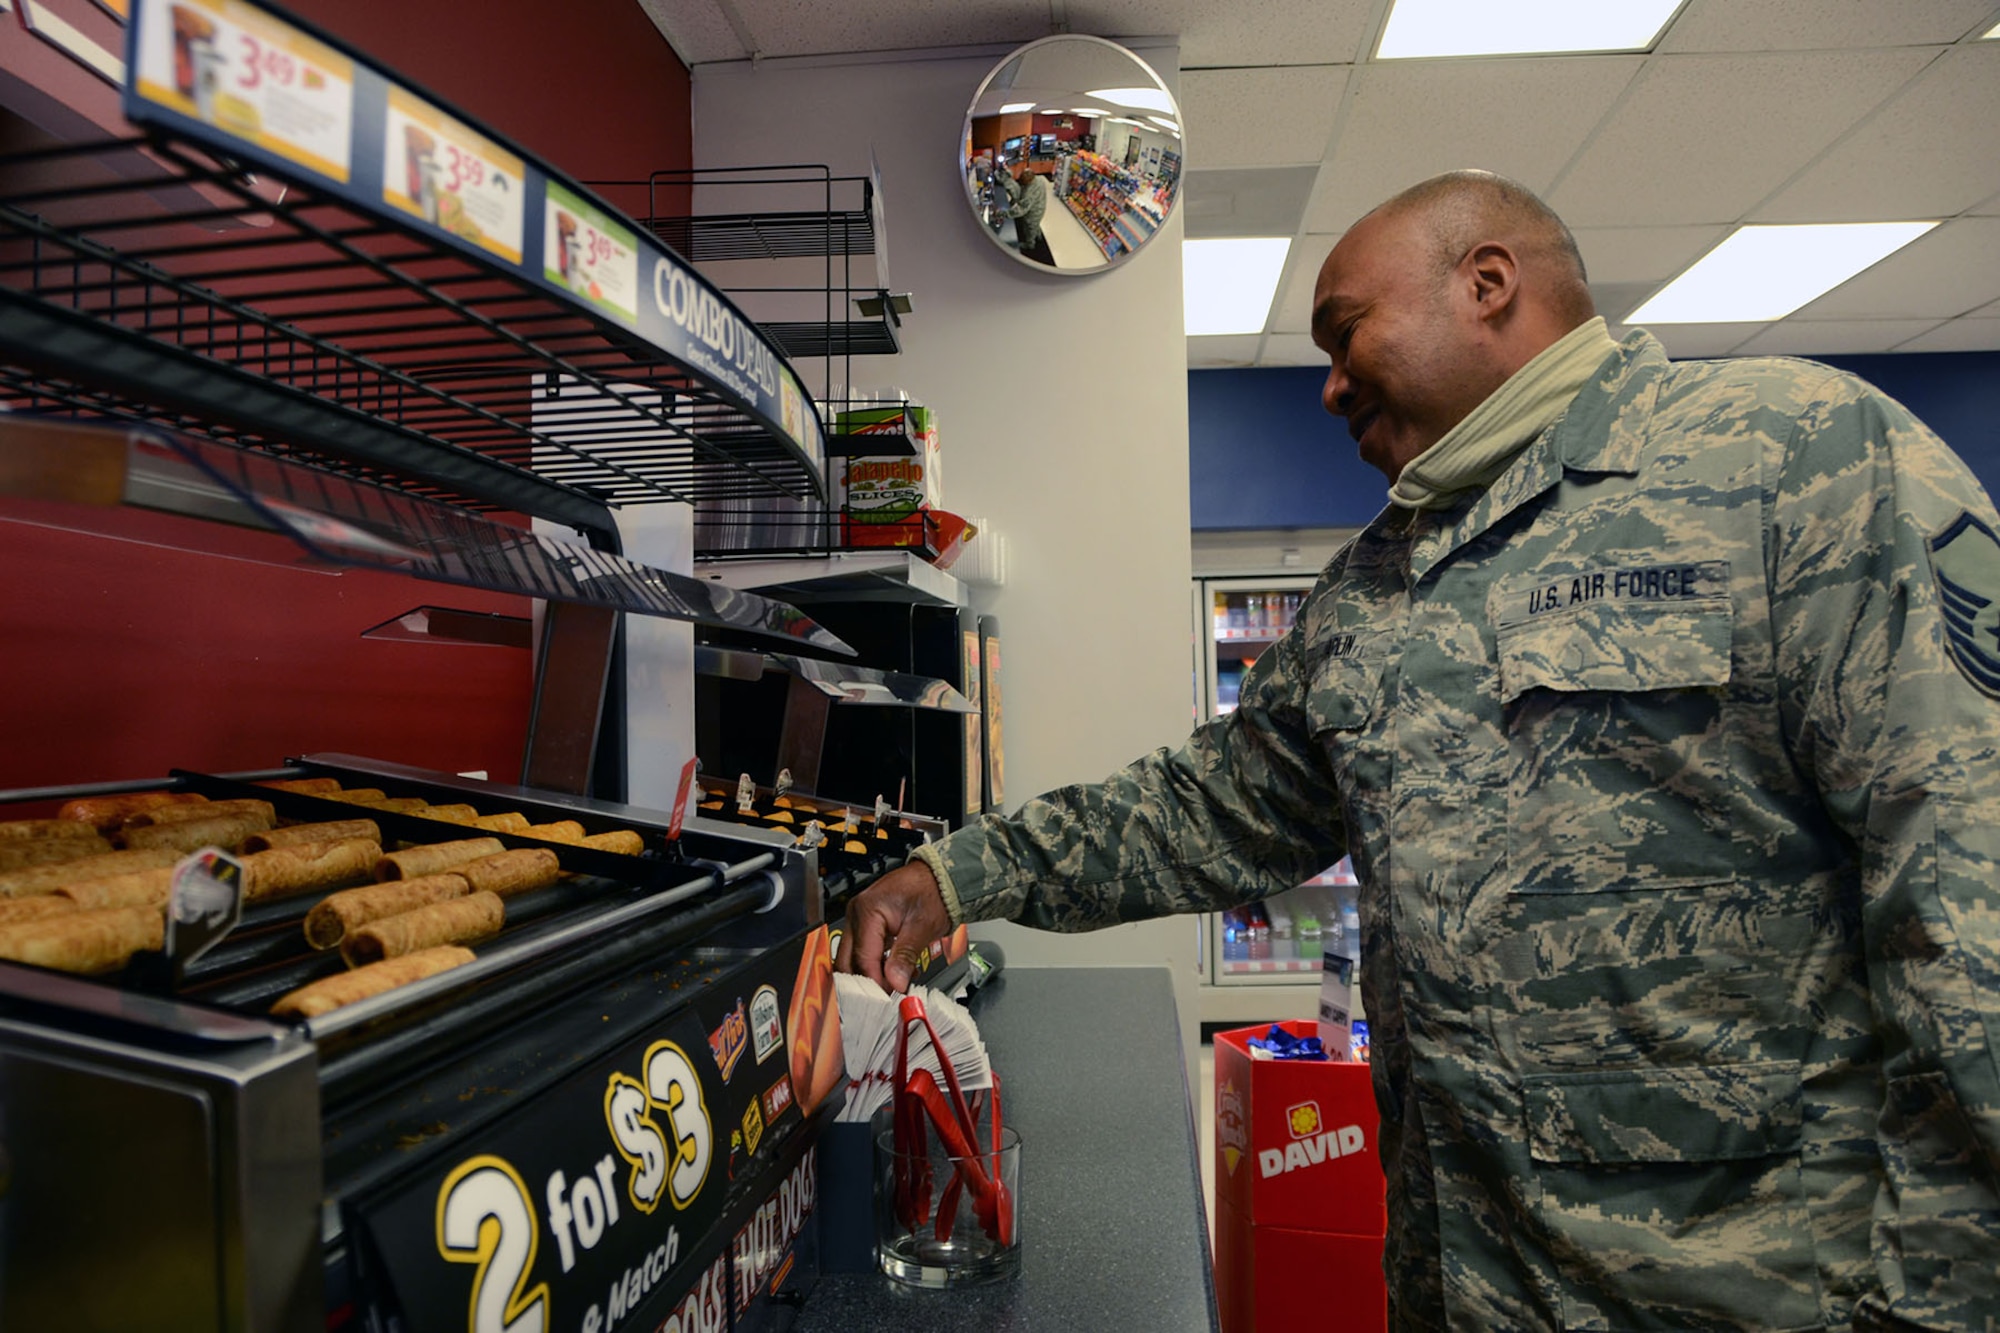 U.S. Air Force Master Sgt. Rodney Chaplin, an aerospace ground equipment technician with the 169th Maintenance Squadron, shops at the Base Exchange on McEntire Joint National Guard Base, S.C., Jan. 5, 2016. The BX offers a variety of options for their customers while also contributing to the community. (U.S. Air National Guard photo by Airman Megan Floyd/Released)